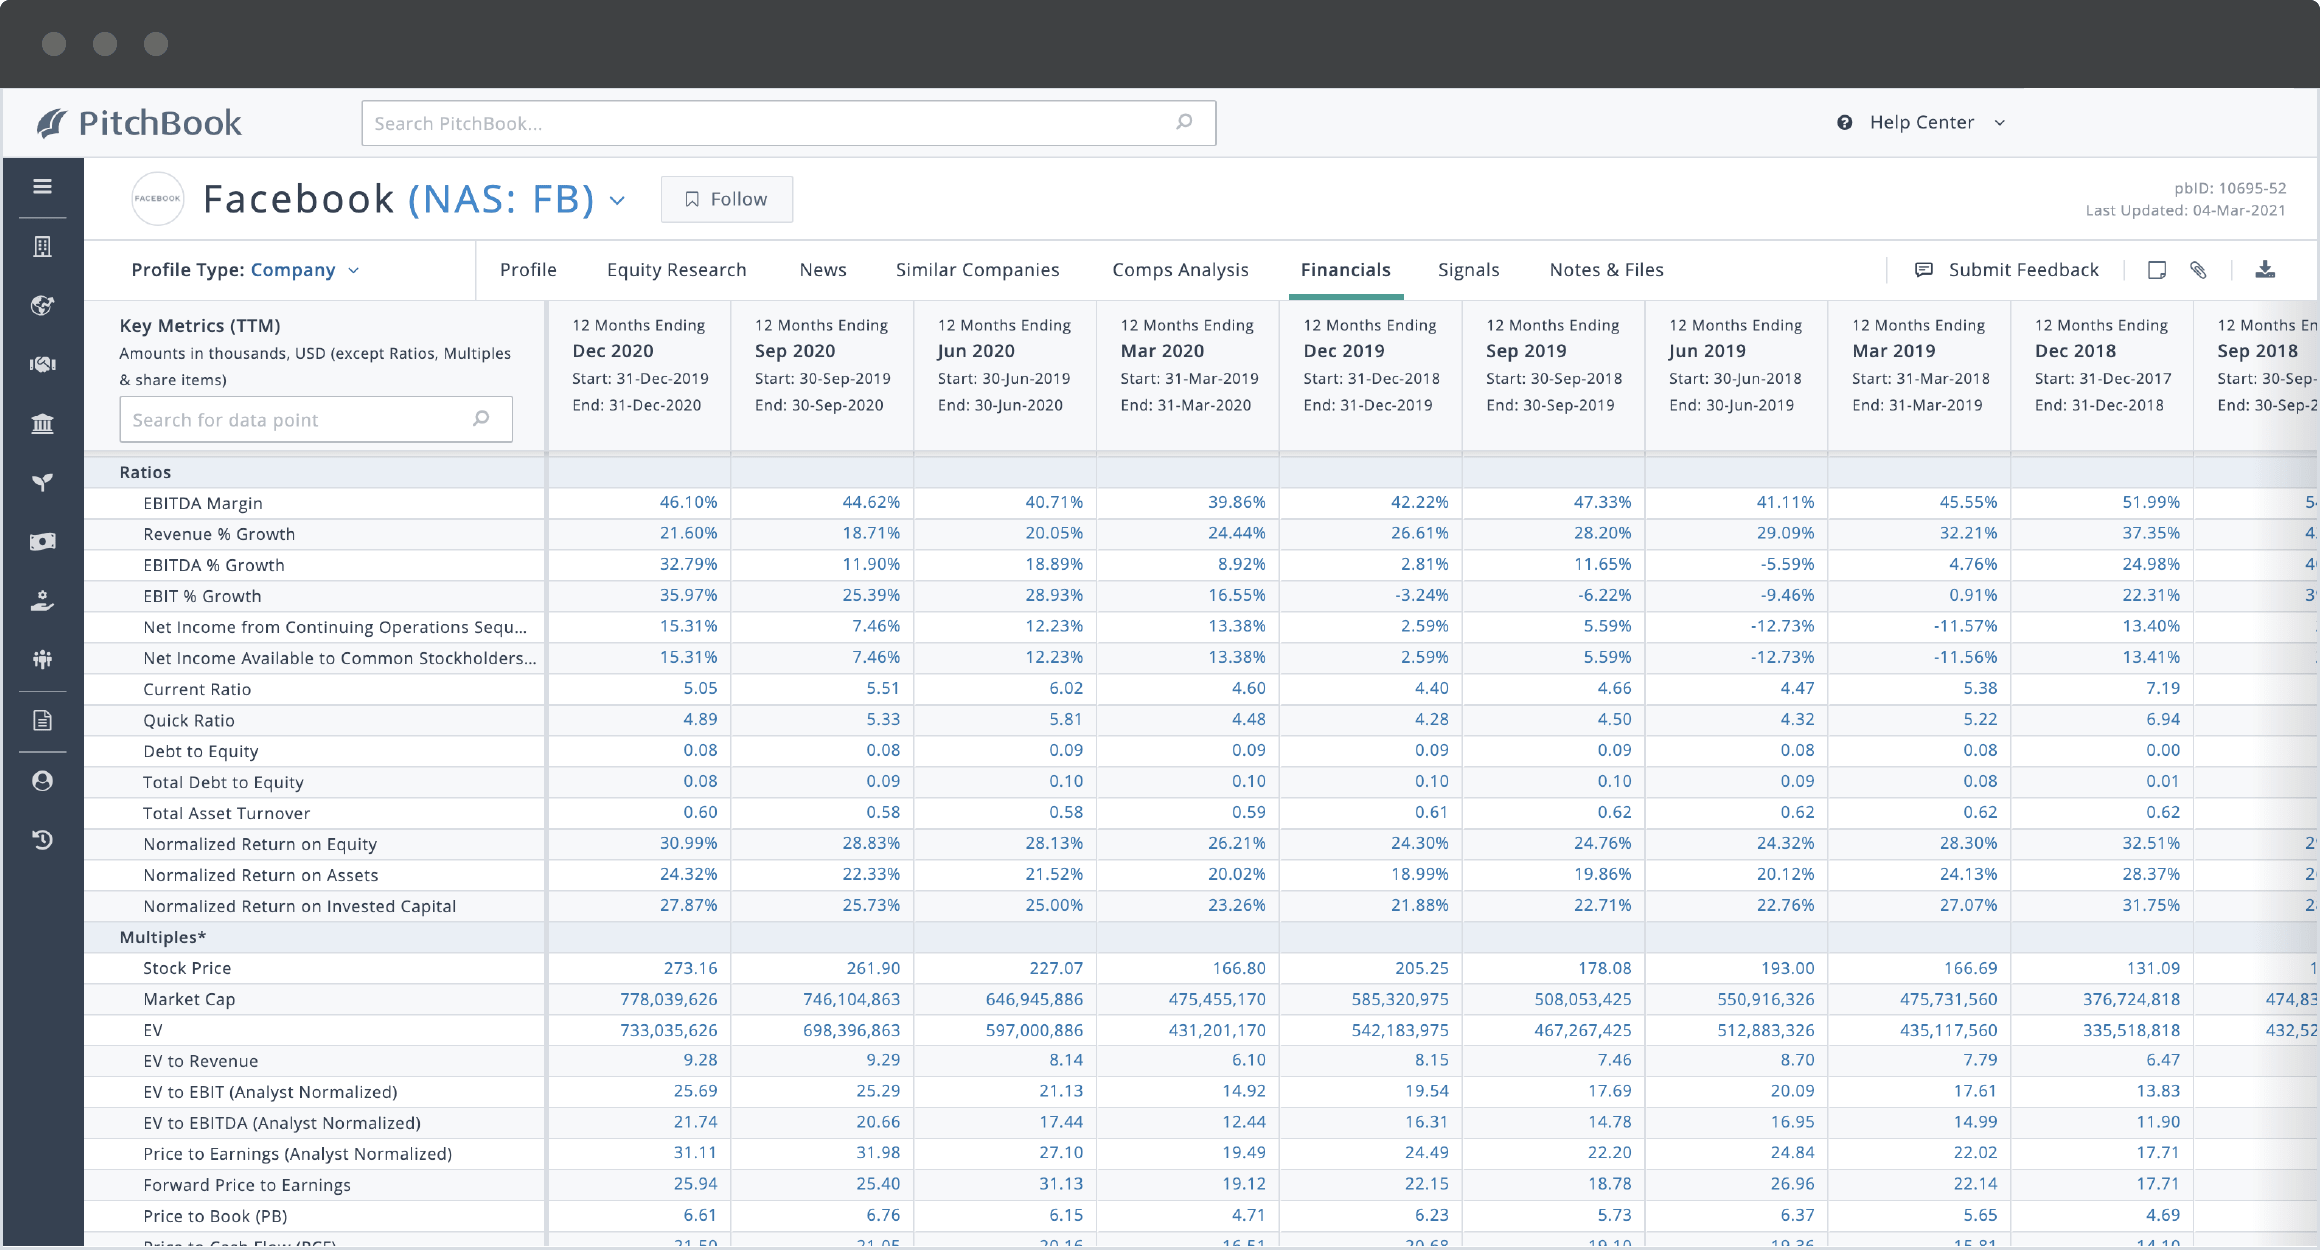 PitchBook company profile showing Facebook’s ratios and multiples.